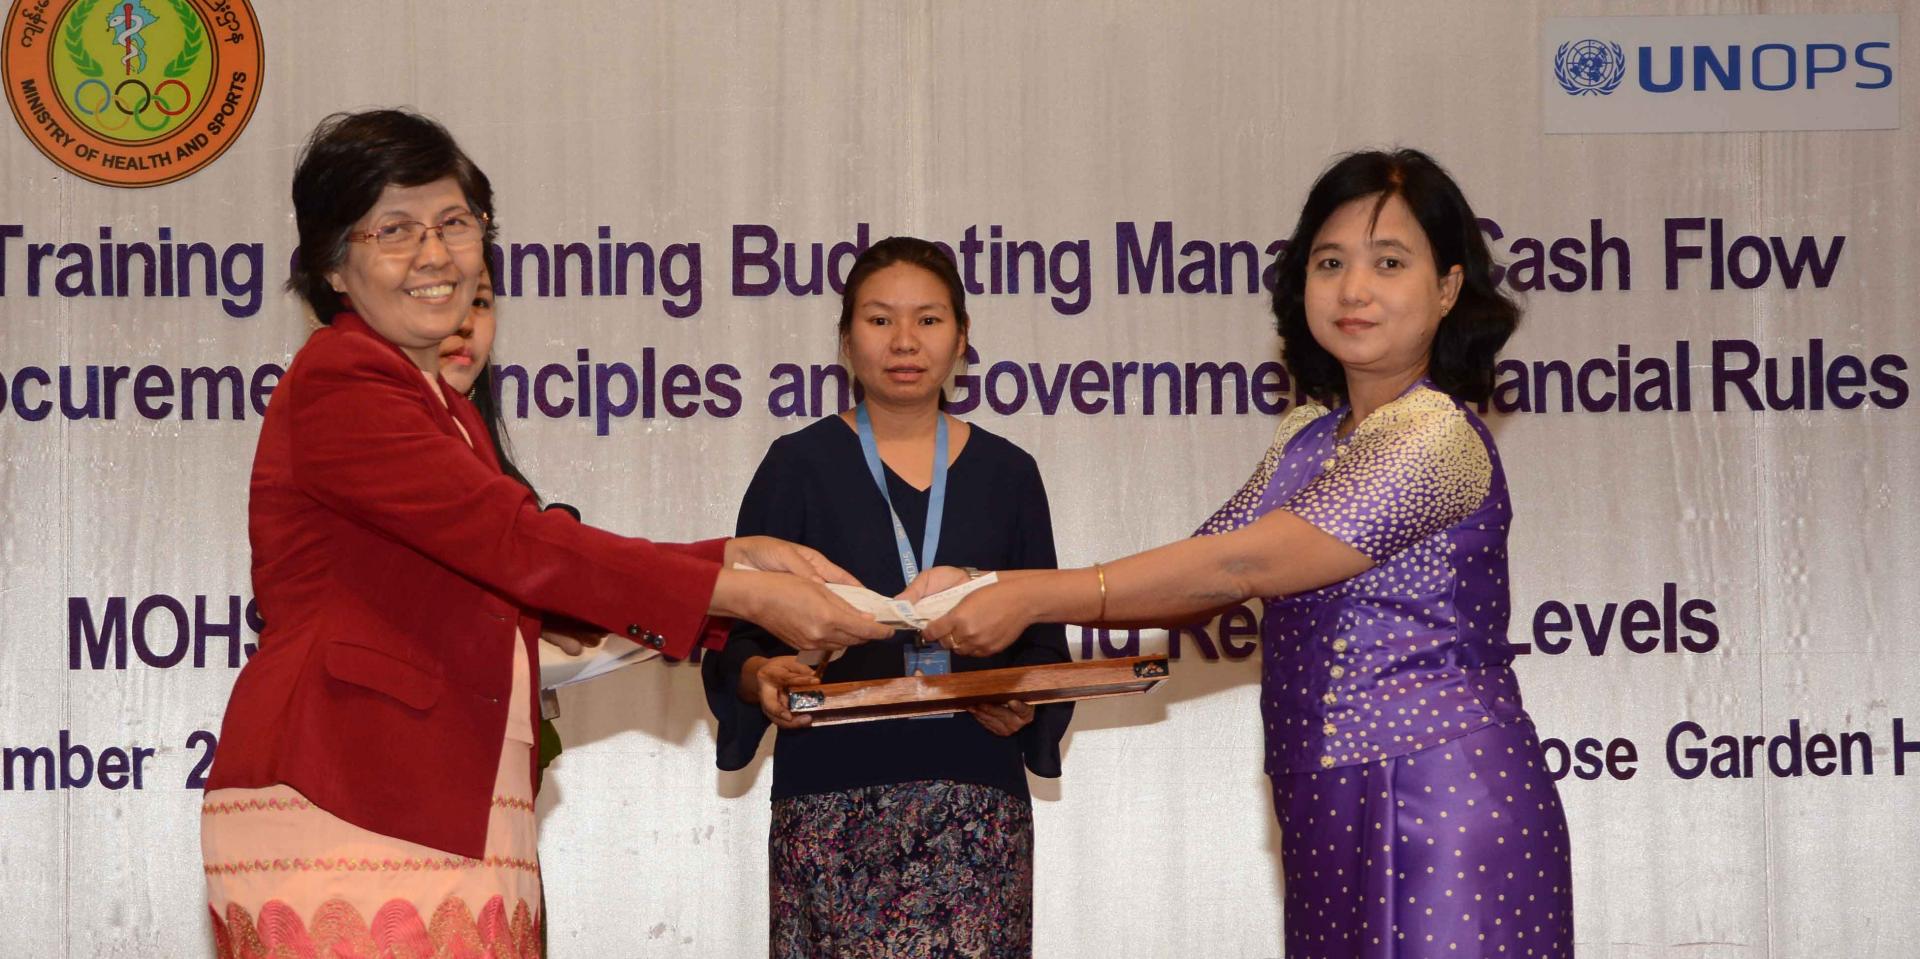 MOHS Yangon Region Deputy Director (Disease Control) Dr Khin Nan Lon presents prizes to participants who scored high marks in the practical workplanning exercises. Photo: UNOPS